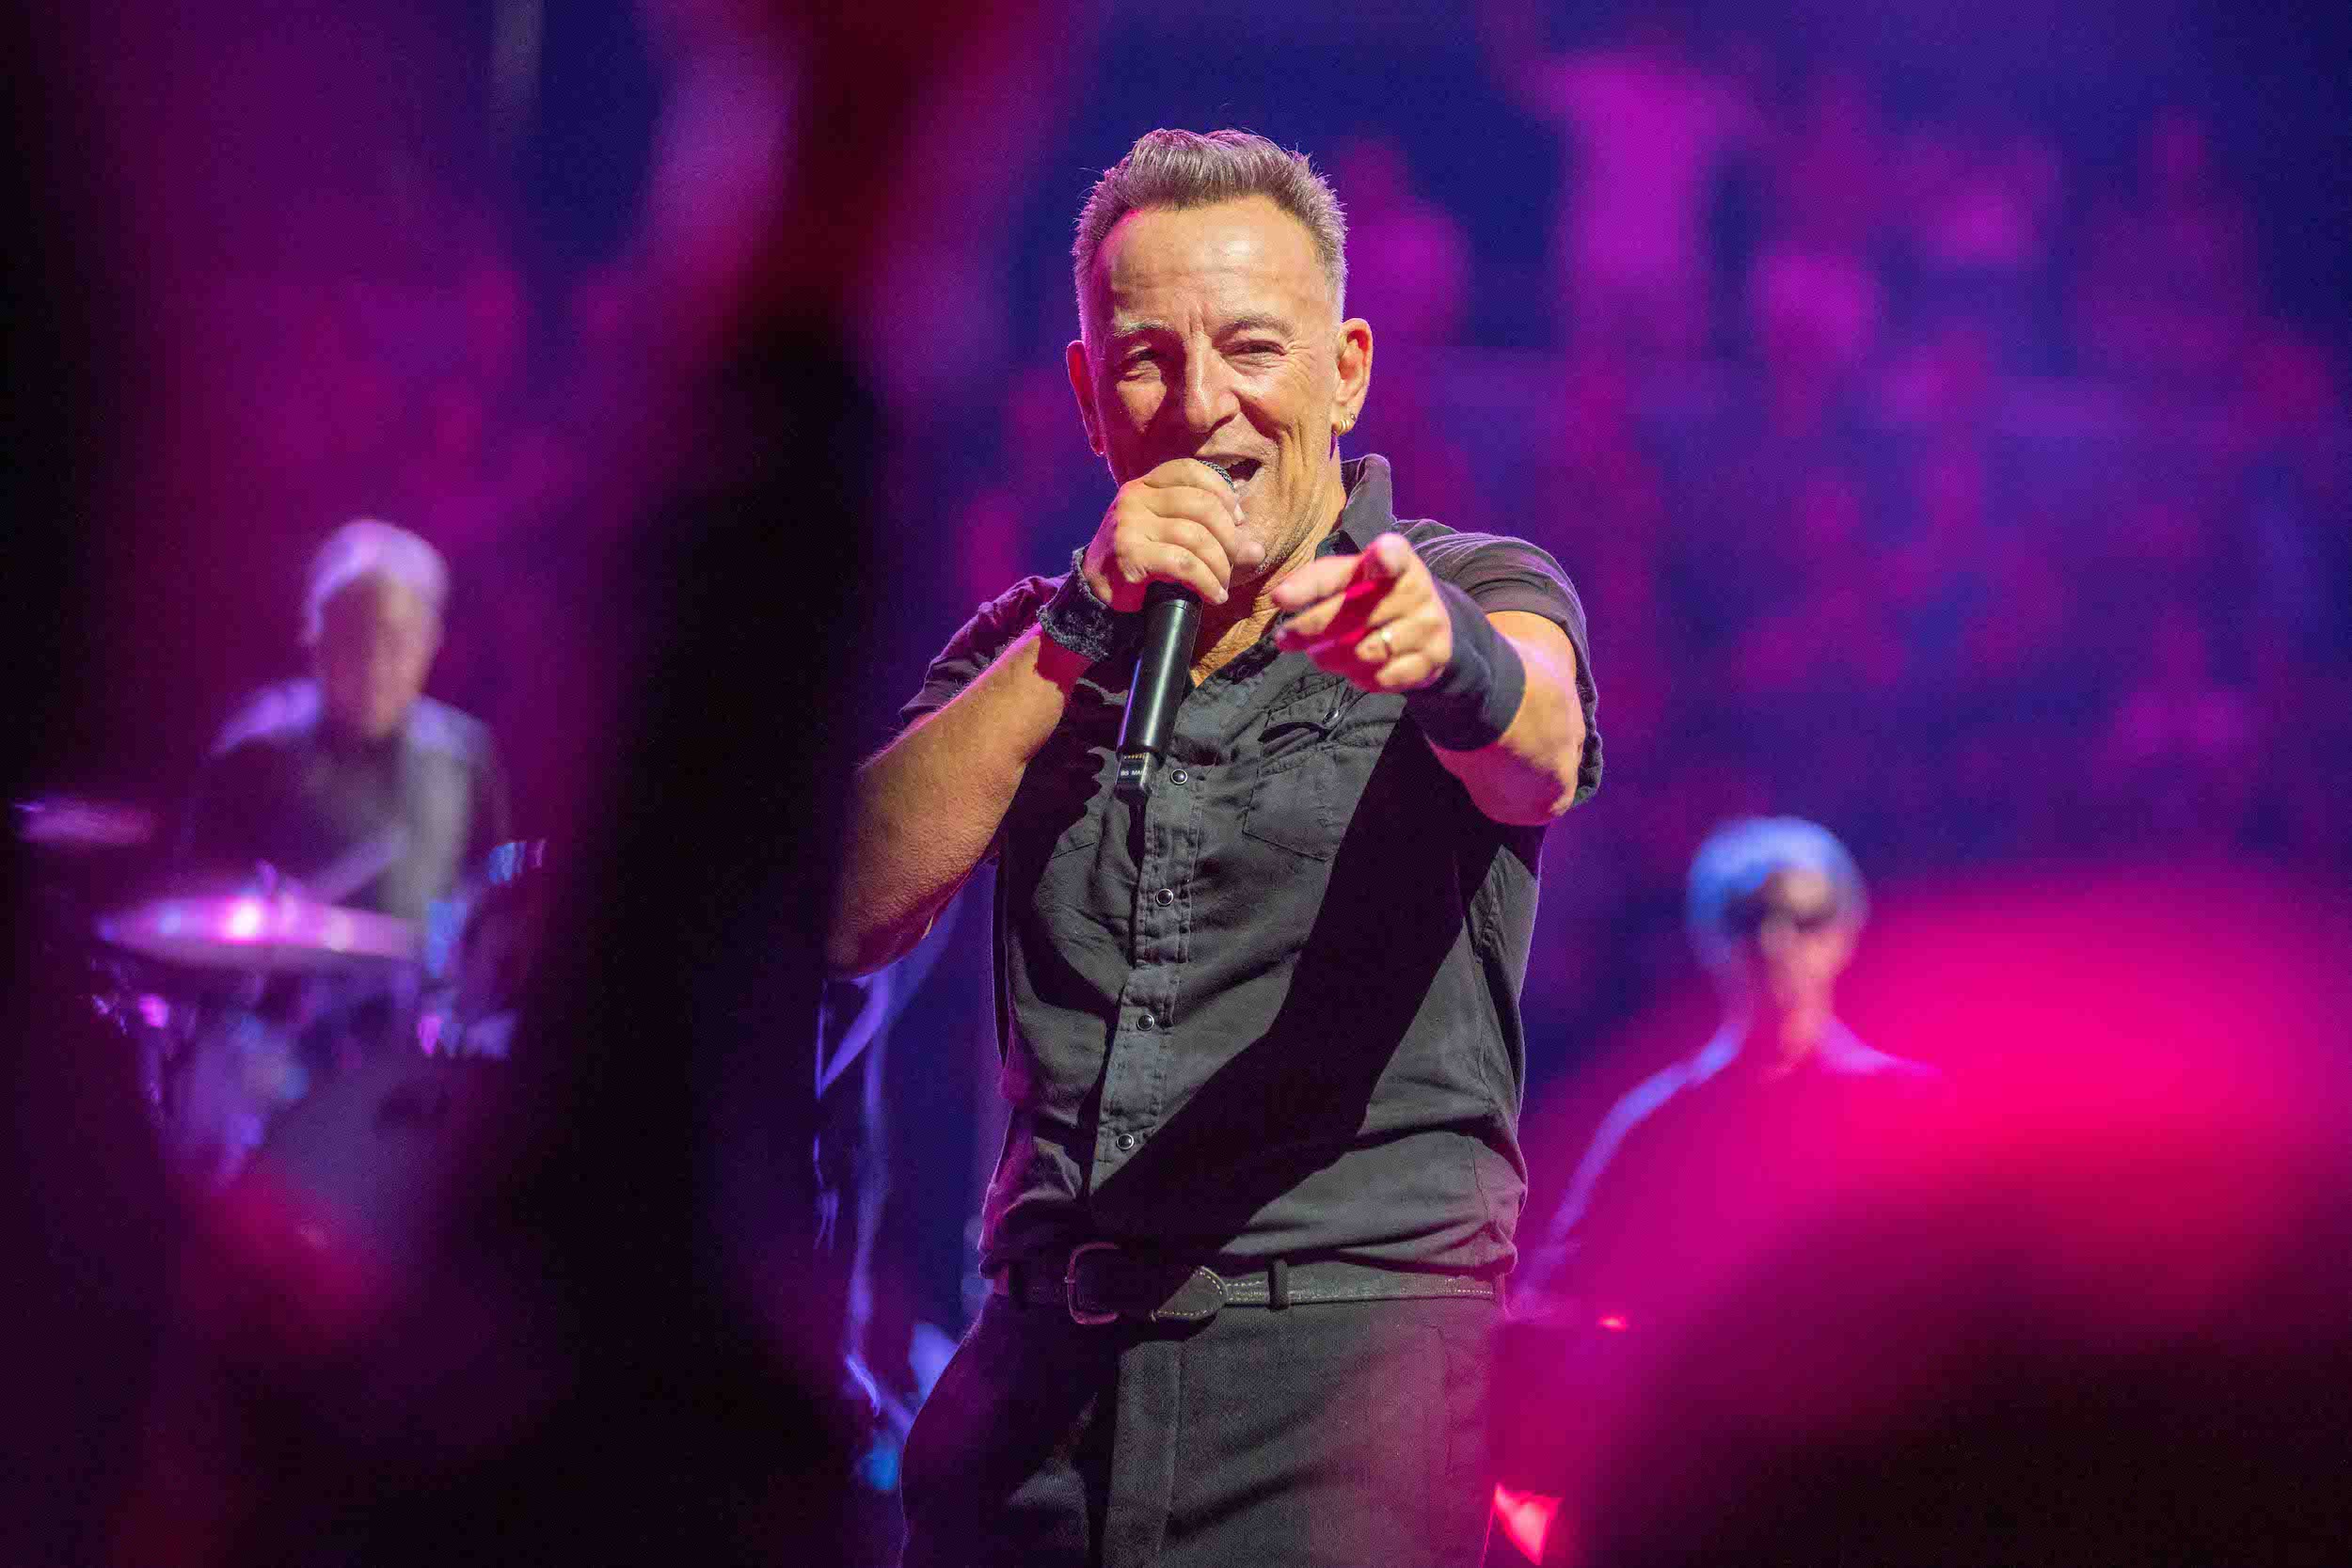 Bruce Springsteen & E Street Band at Amalie Arena, Tampa, FL on February 1, 2023.